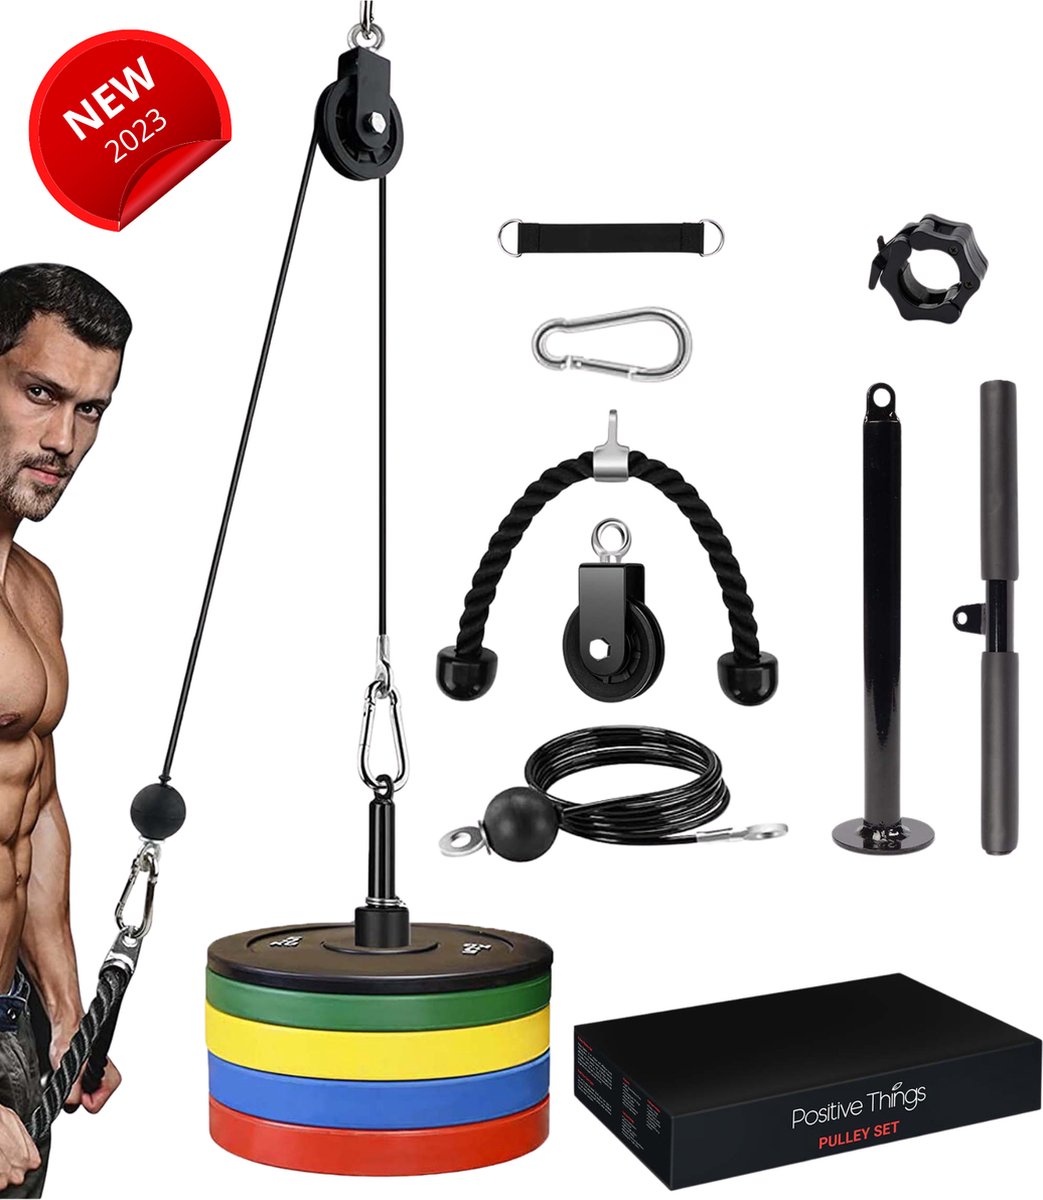 Positive Things Home Gym Fitness Set - Krachtstation Kabelsysteem - Kabelstation - Lat Pulley - Tricep touw